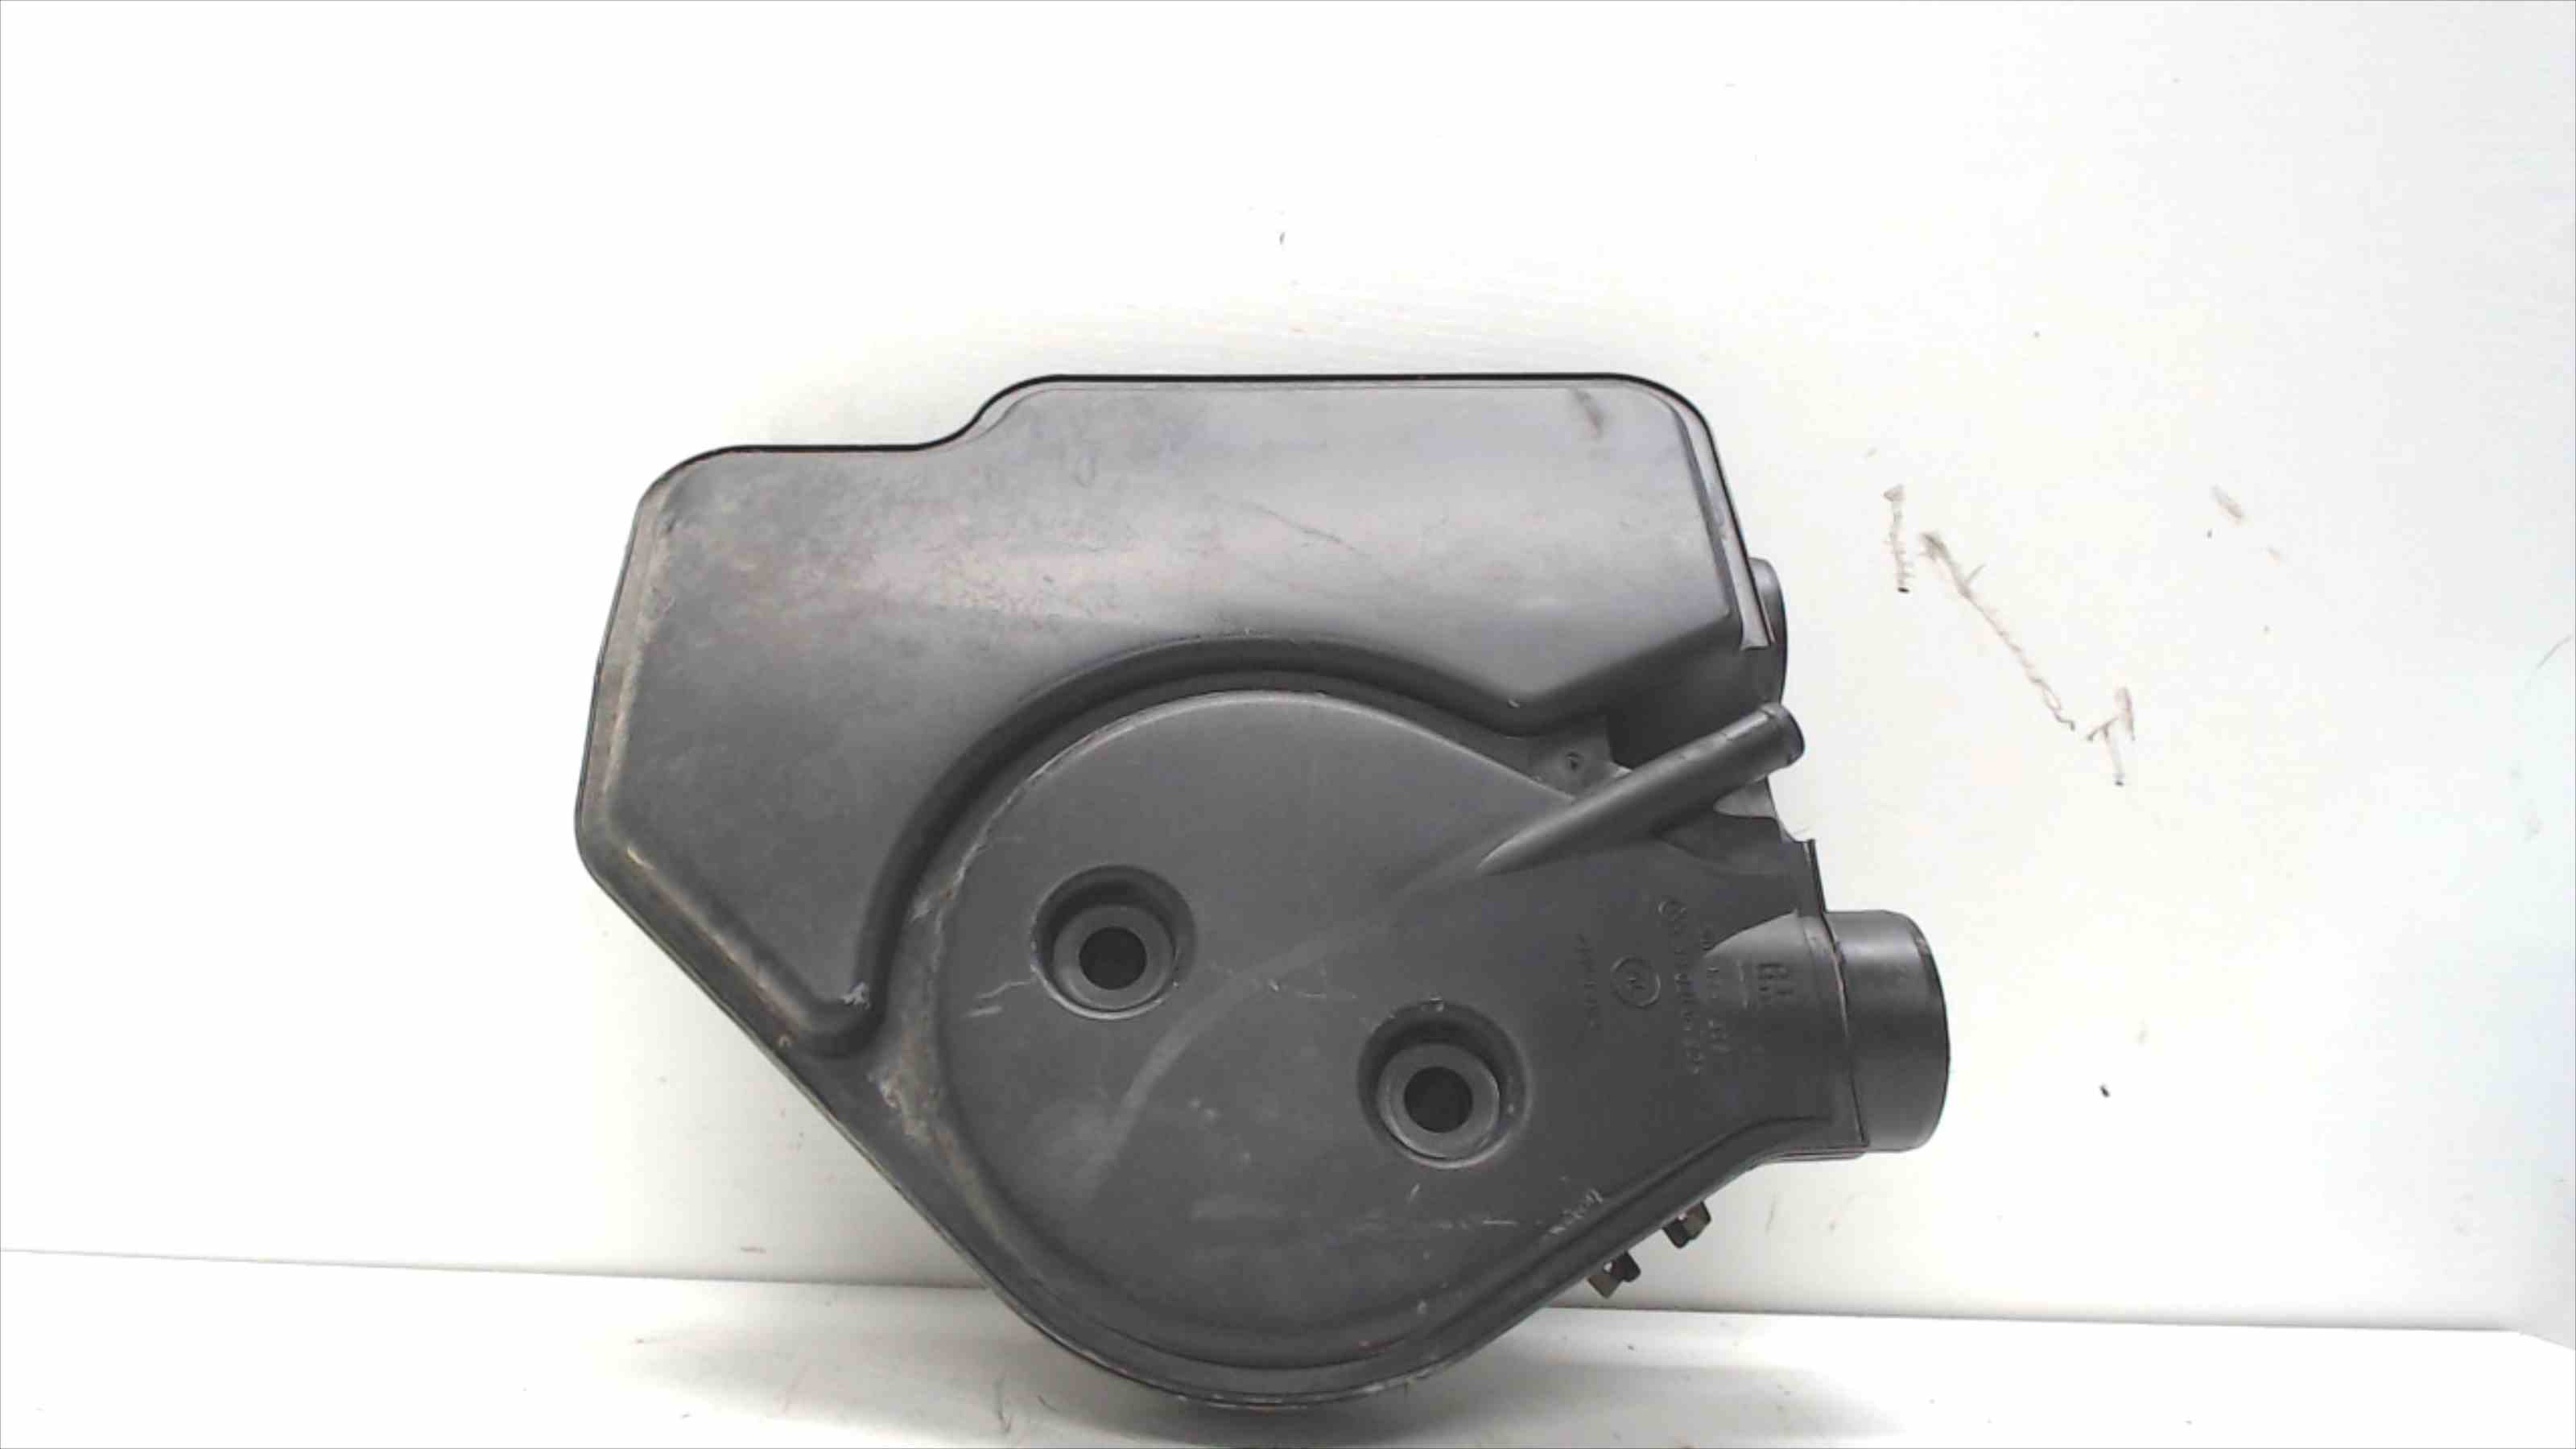 OPEL Astra H (2004-2014) Other Engine Compartment Parts 90573598 24689220